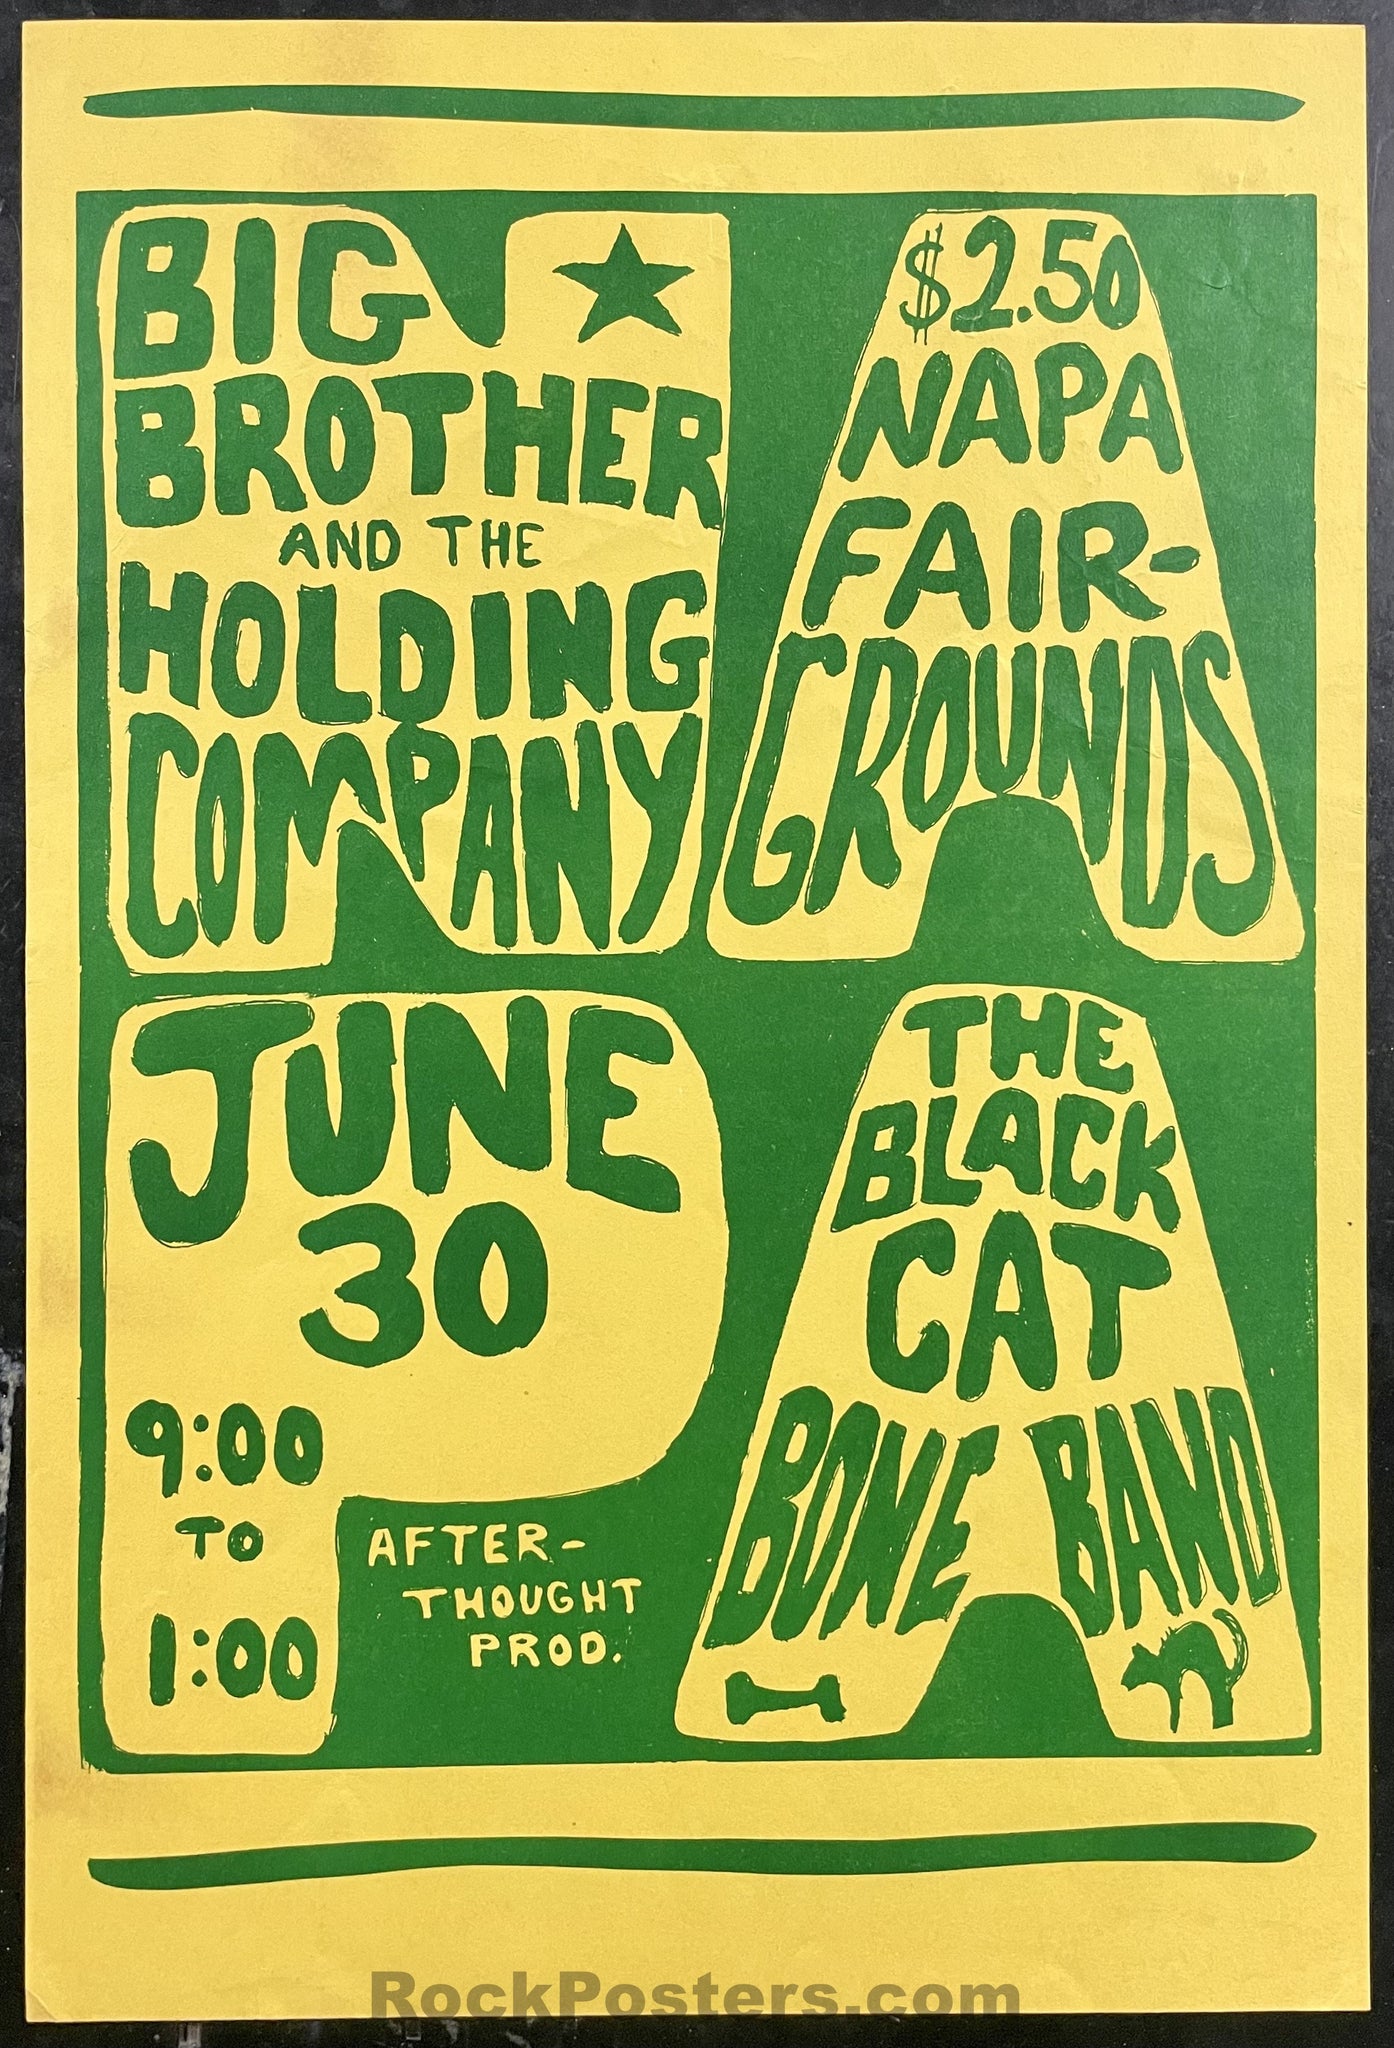 AUCTION -  Big Brother Janis Joplin - 1967 Poster - Napa CA - Excellent